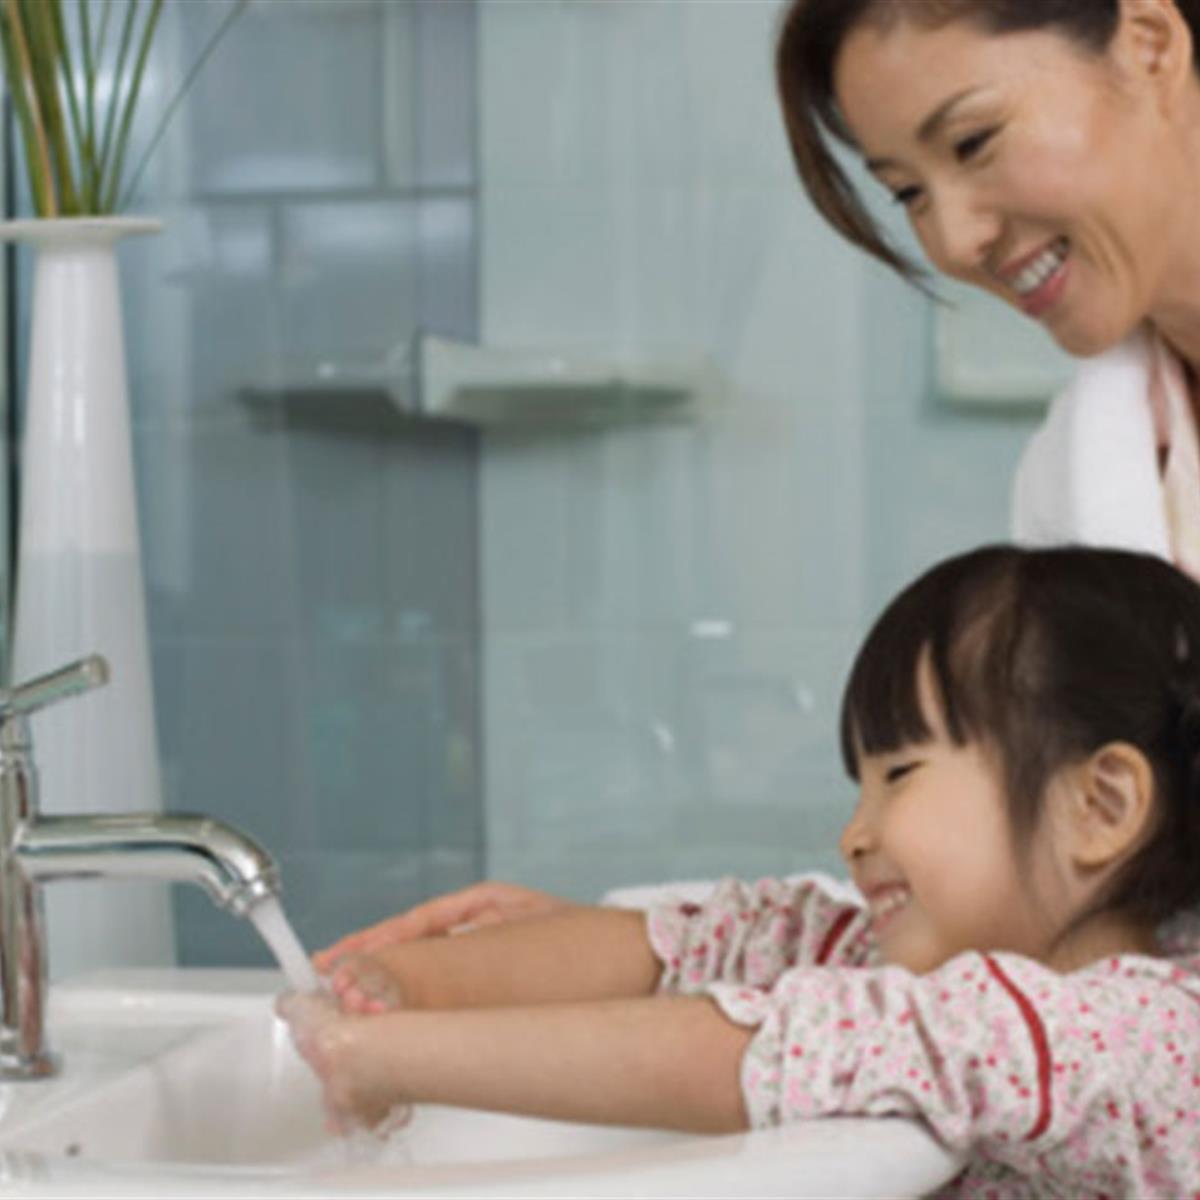 How can Hand Hygiene Prevent the Spread of Disease?